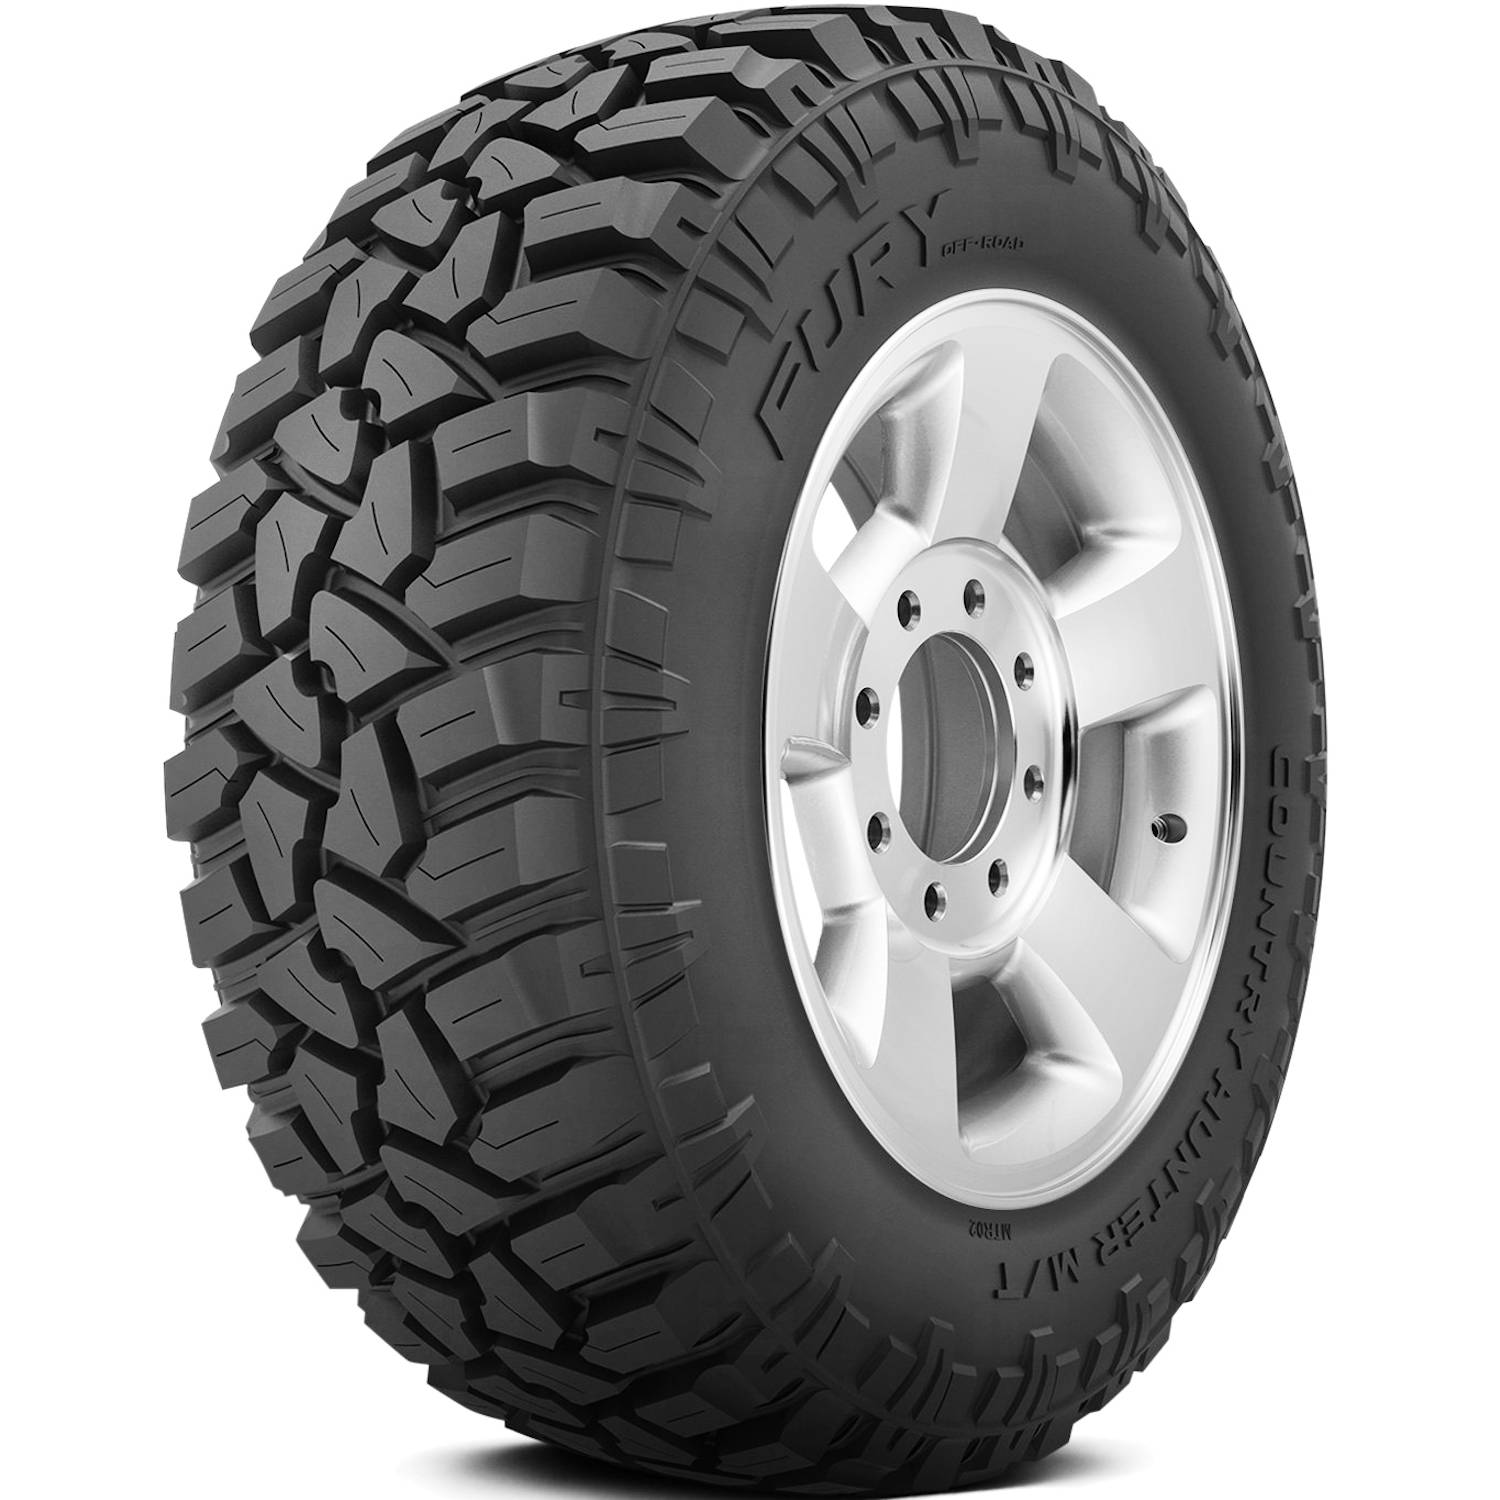 FURY OFFROAD COUNTRY HUNTER MTII 35X13.50R20LT Tires